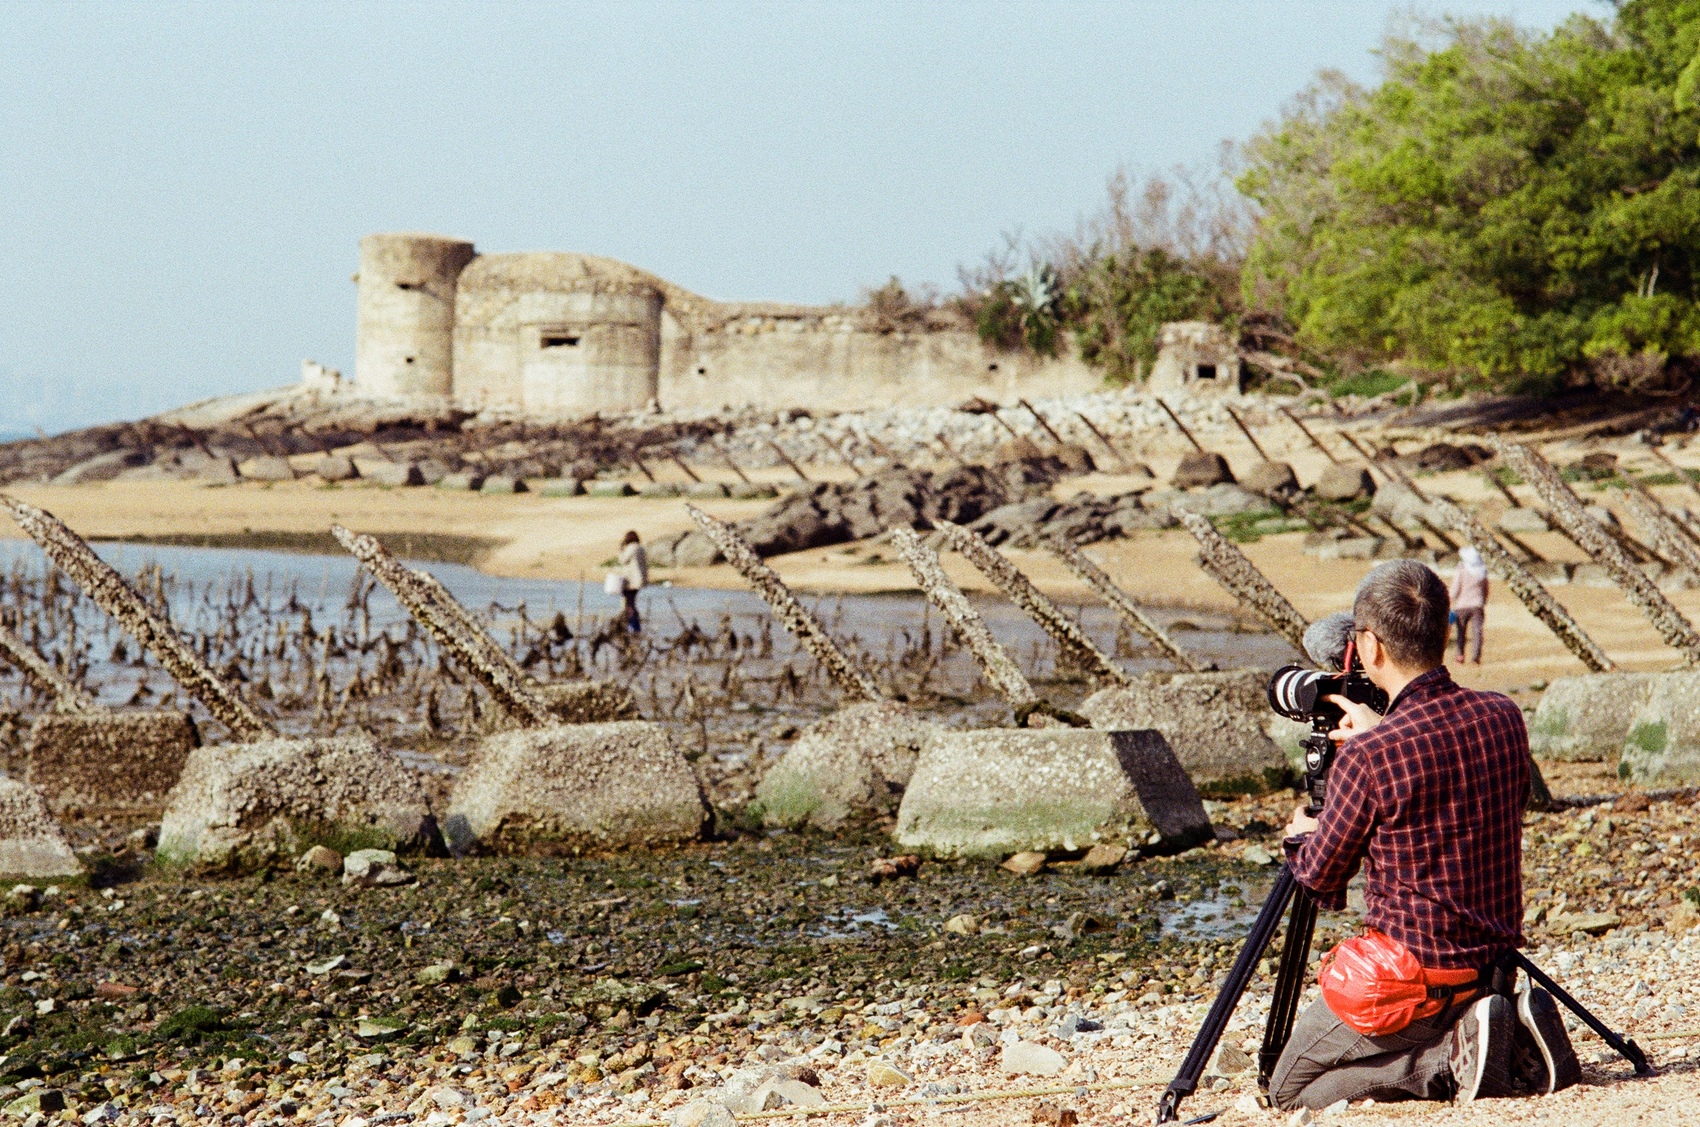 Behind-the-scenes photo of director S. Leo Chiang manning the camera on the beach in Little Kinmen Island, Taiwan.
Photo: Yorke Wu
